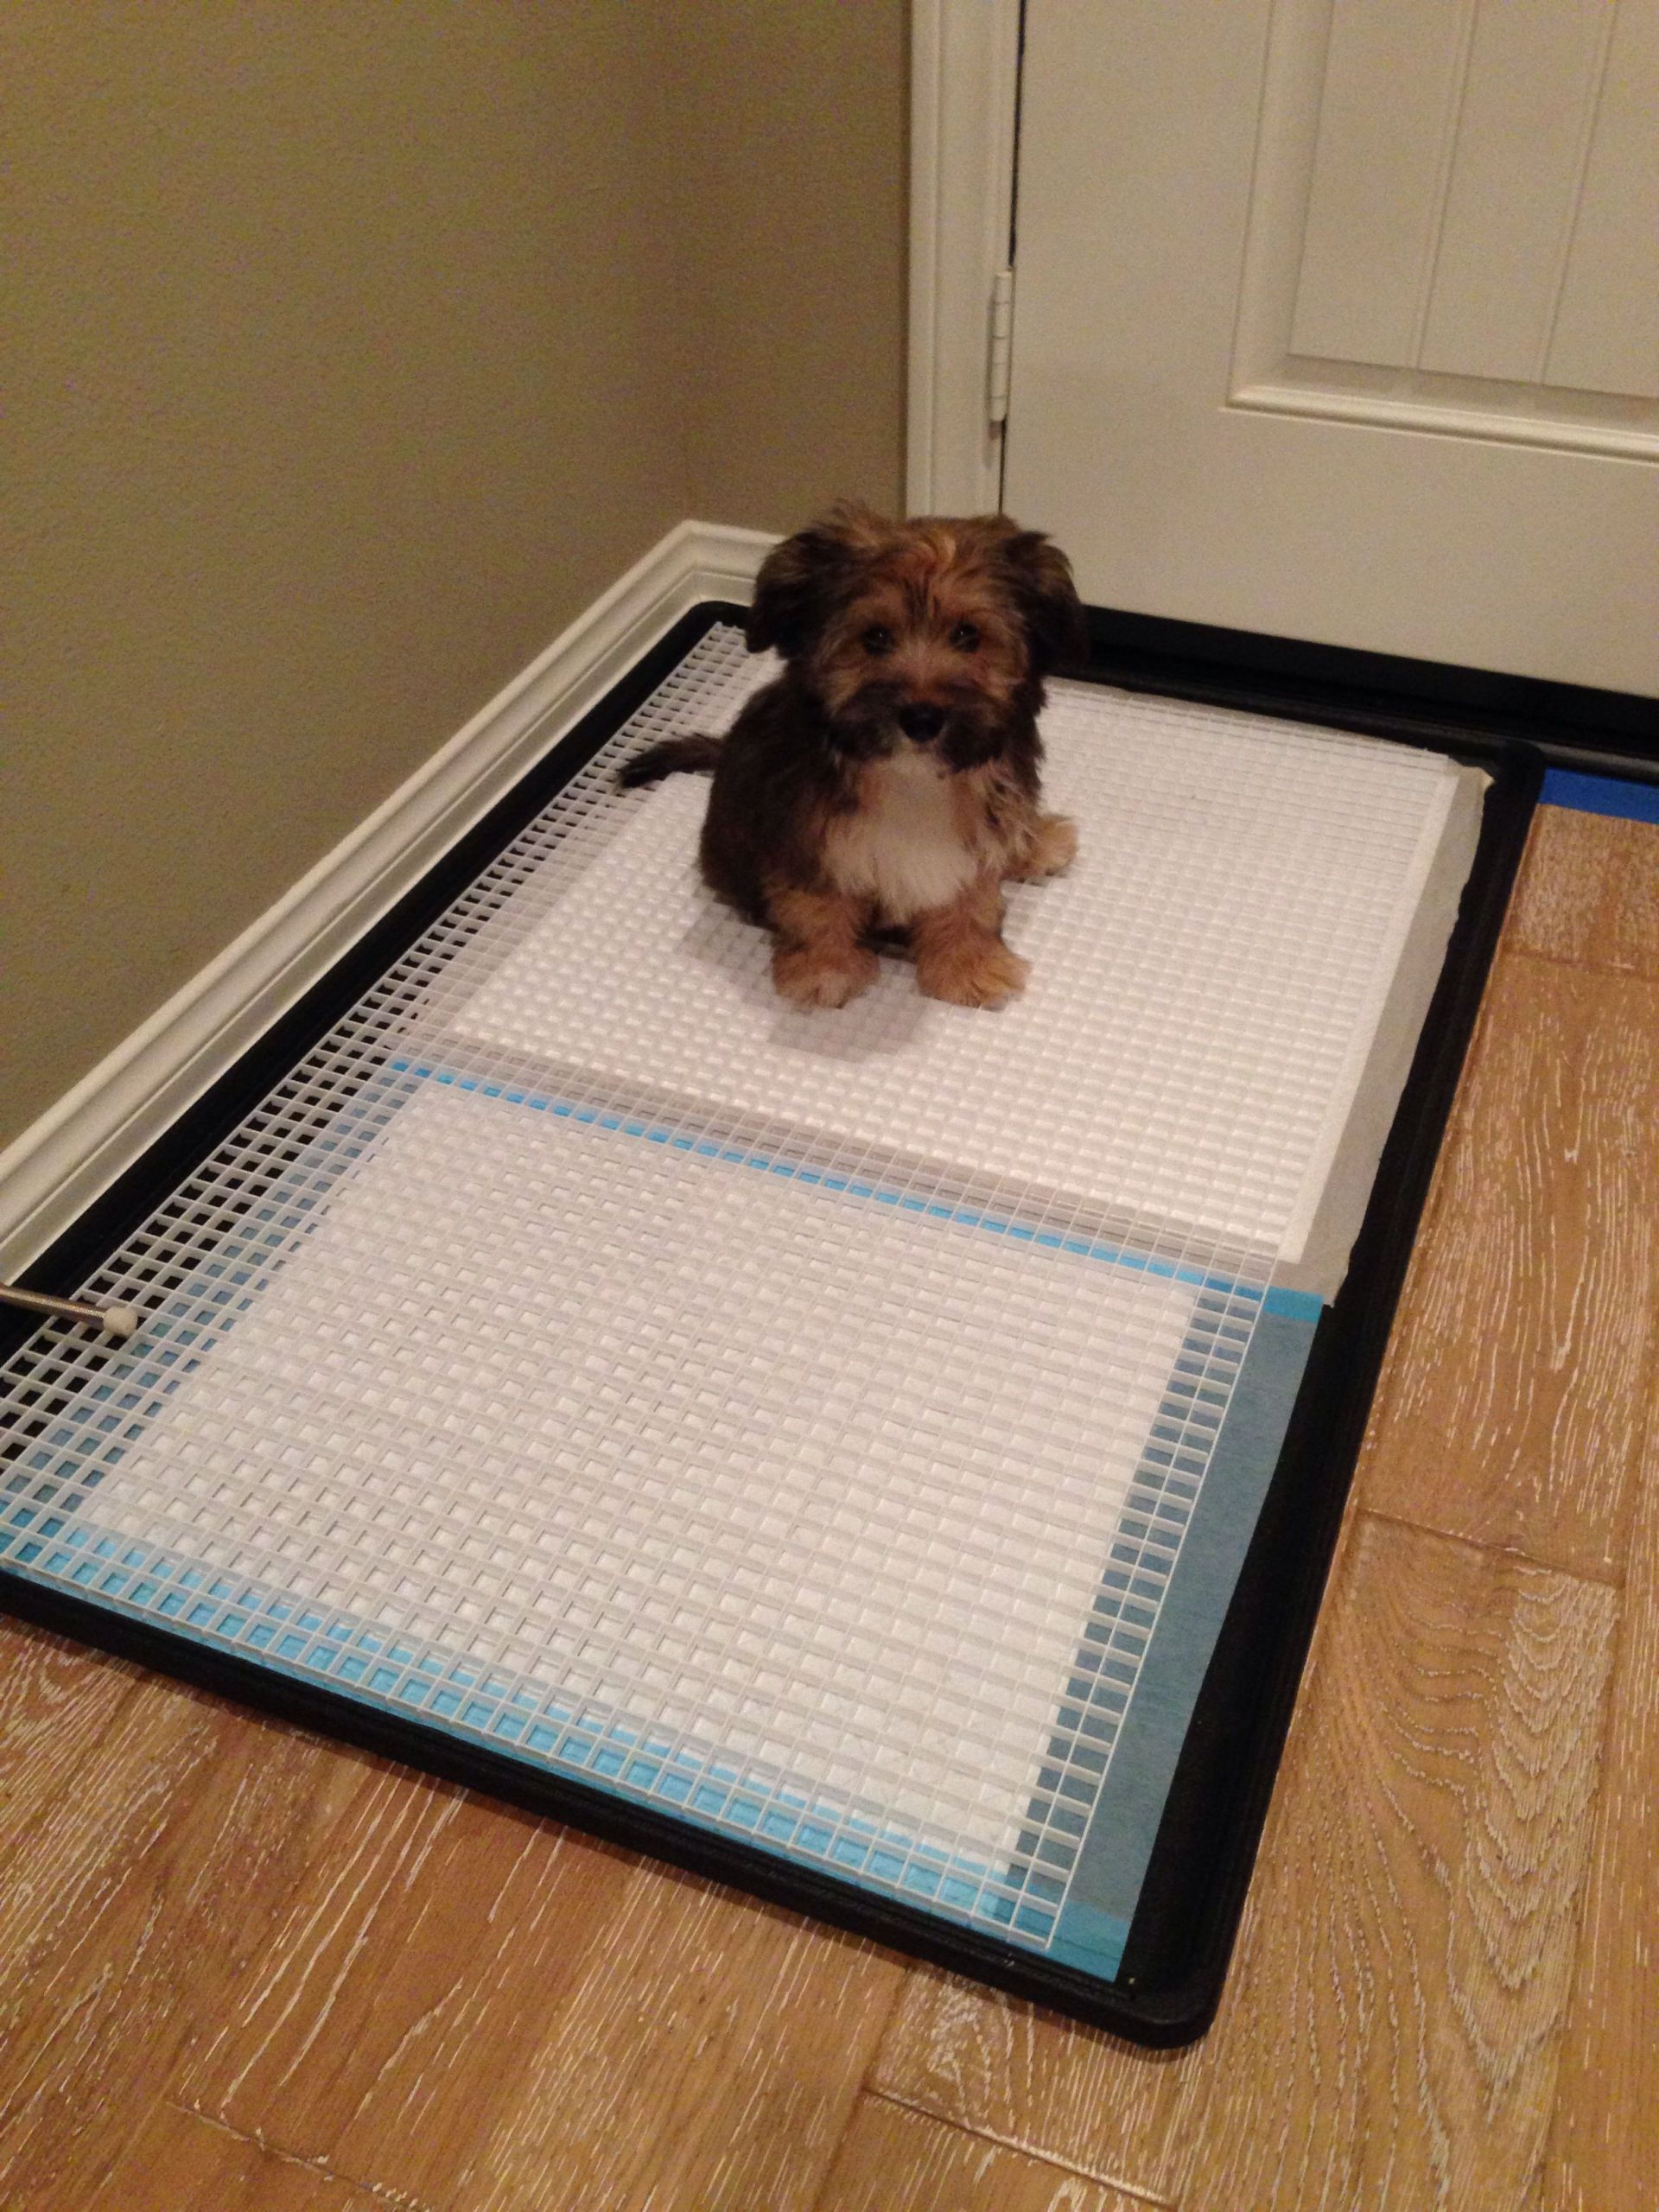 Indoor Dog Potty DIY
 DIY dog toilet tray prevents pee puddle from soiling the